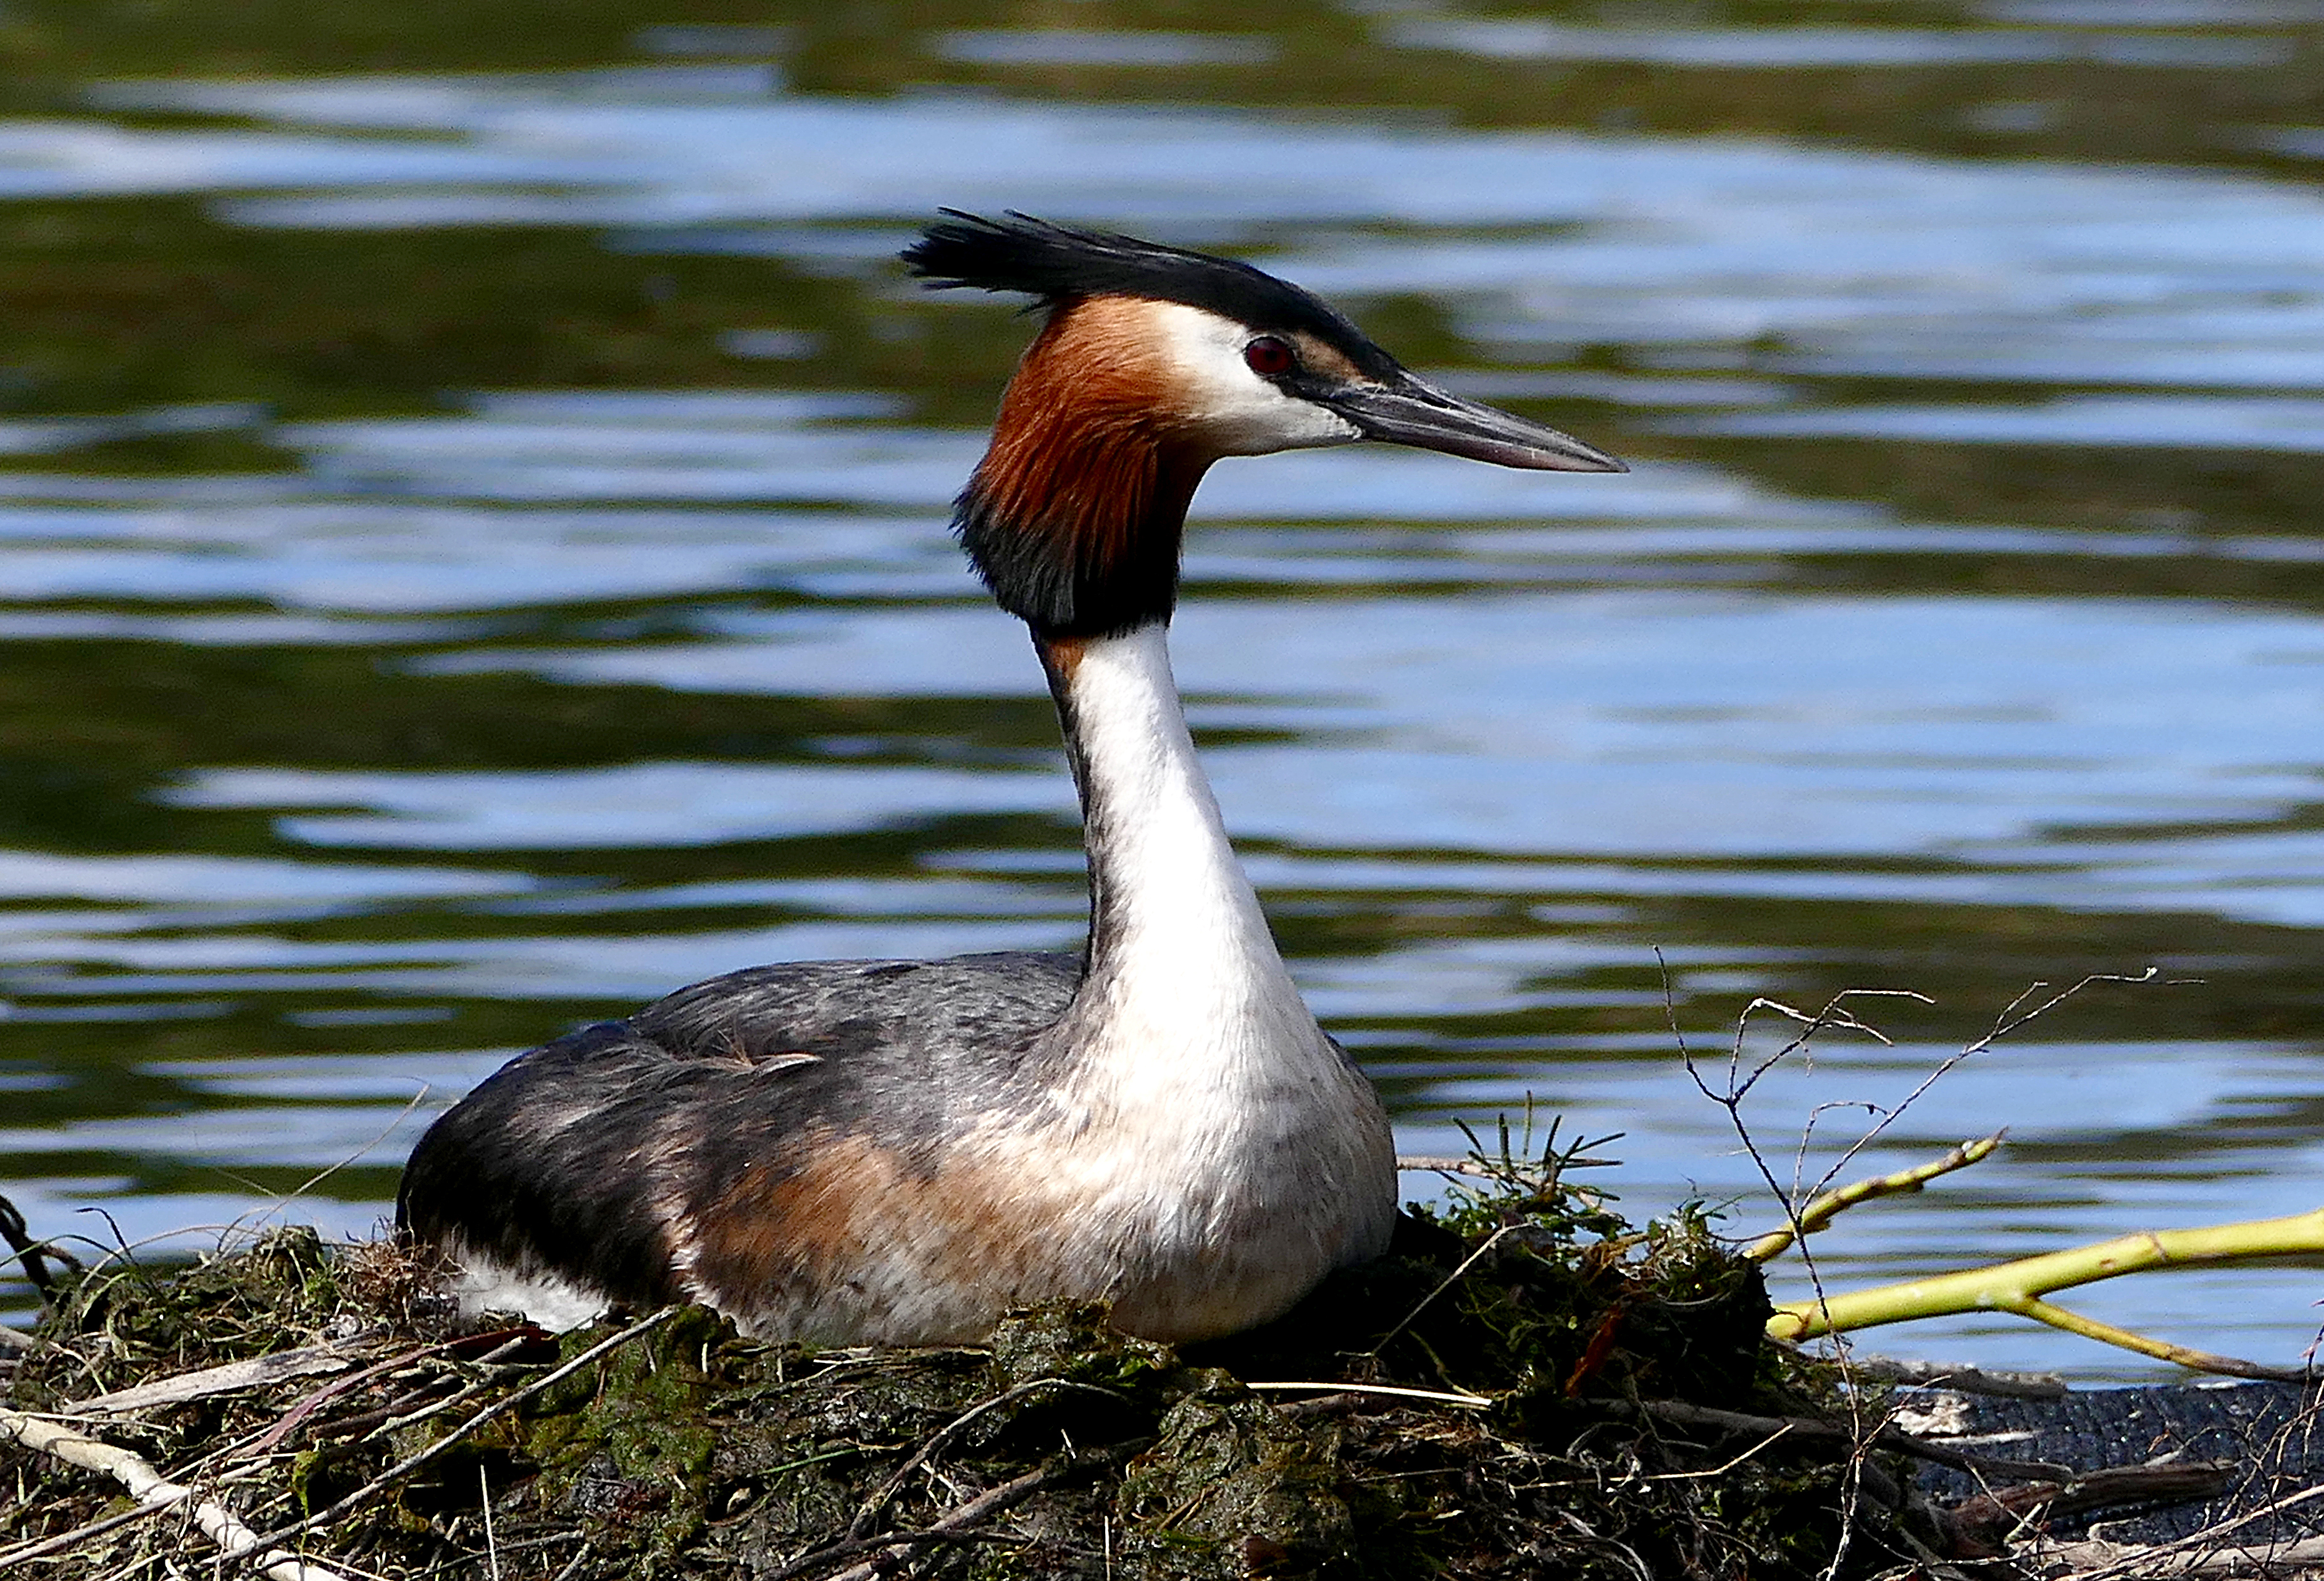 The australasian crested grebe. photo